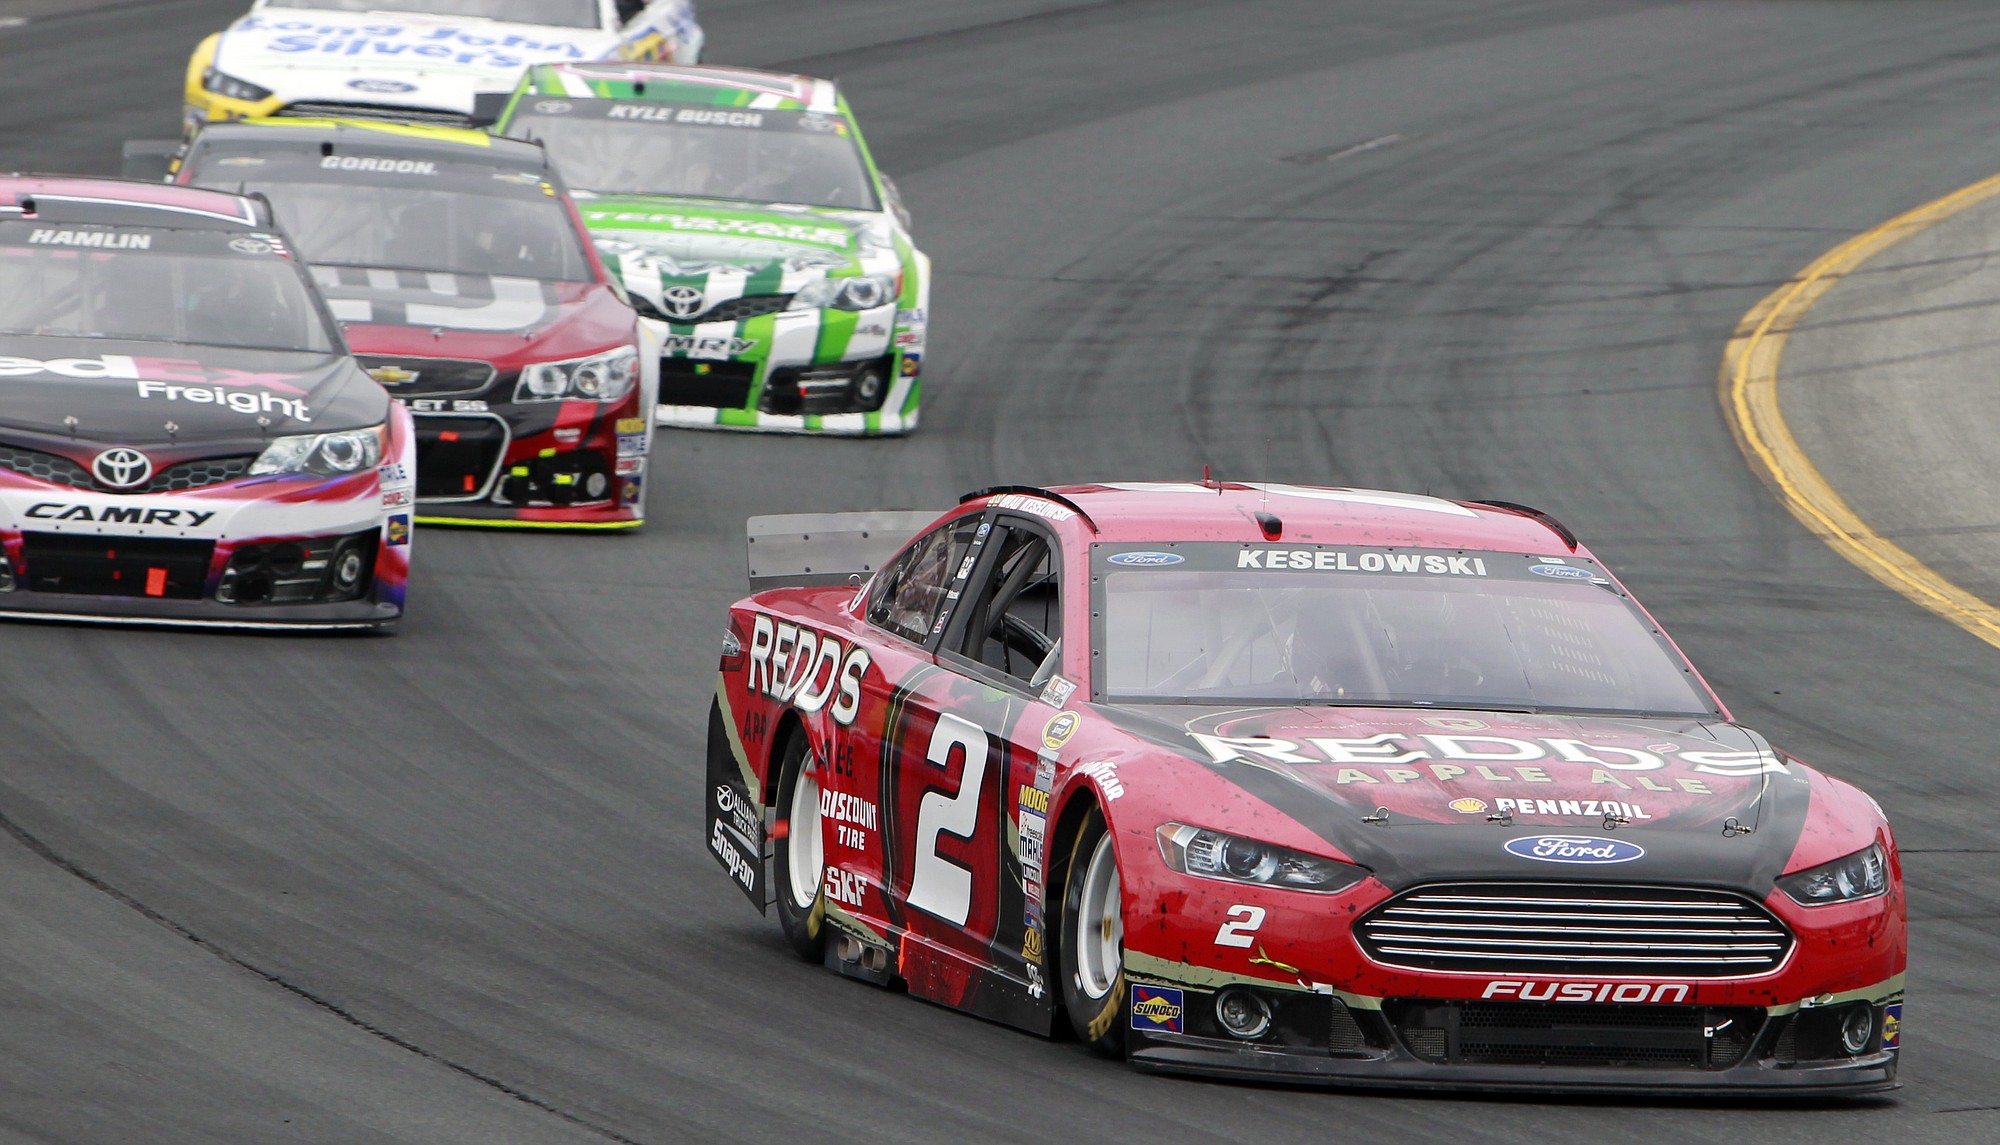 Brad Keselowski (2) leads during the NASCAR Sprint Cup Series auto race at New Hampshire Motor Speedway on Sunday, July 13, 2014, in Loudon, N.H. Keselowski went on to win the race.